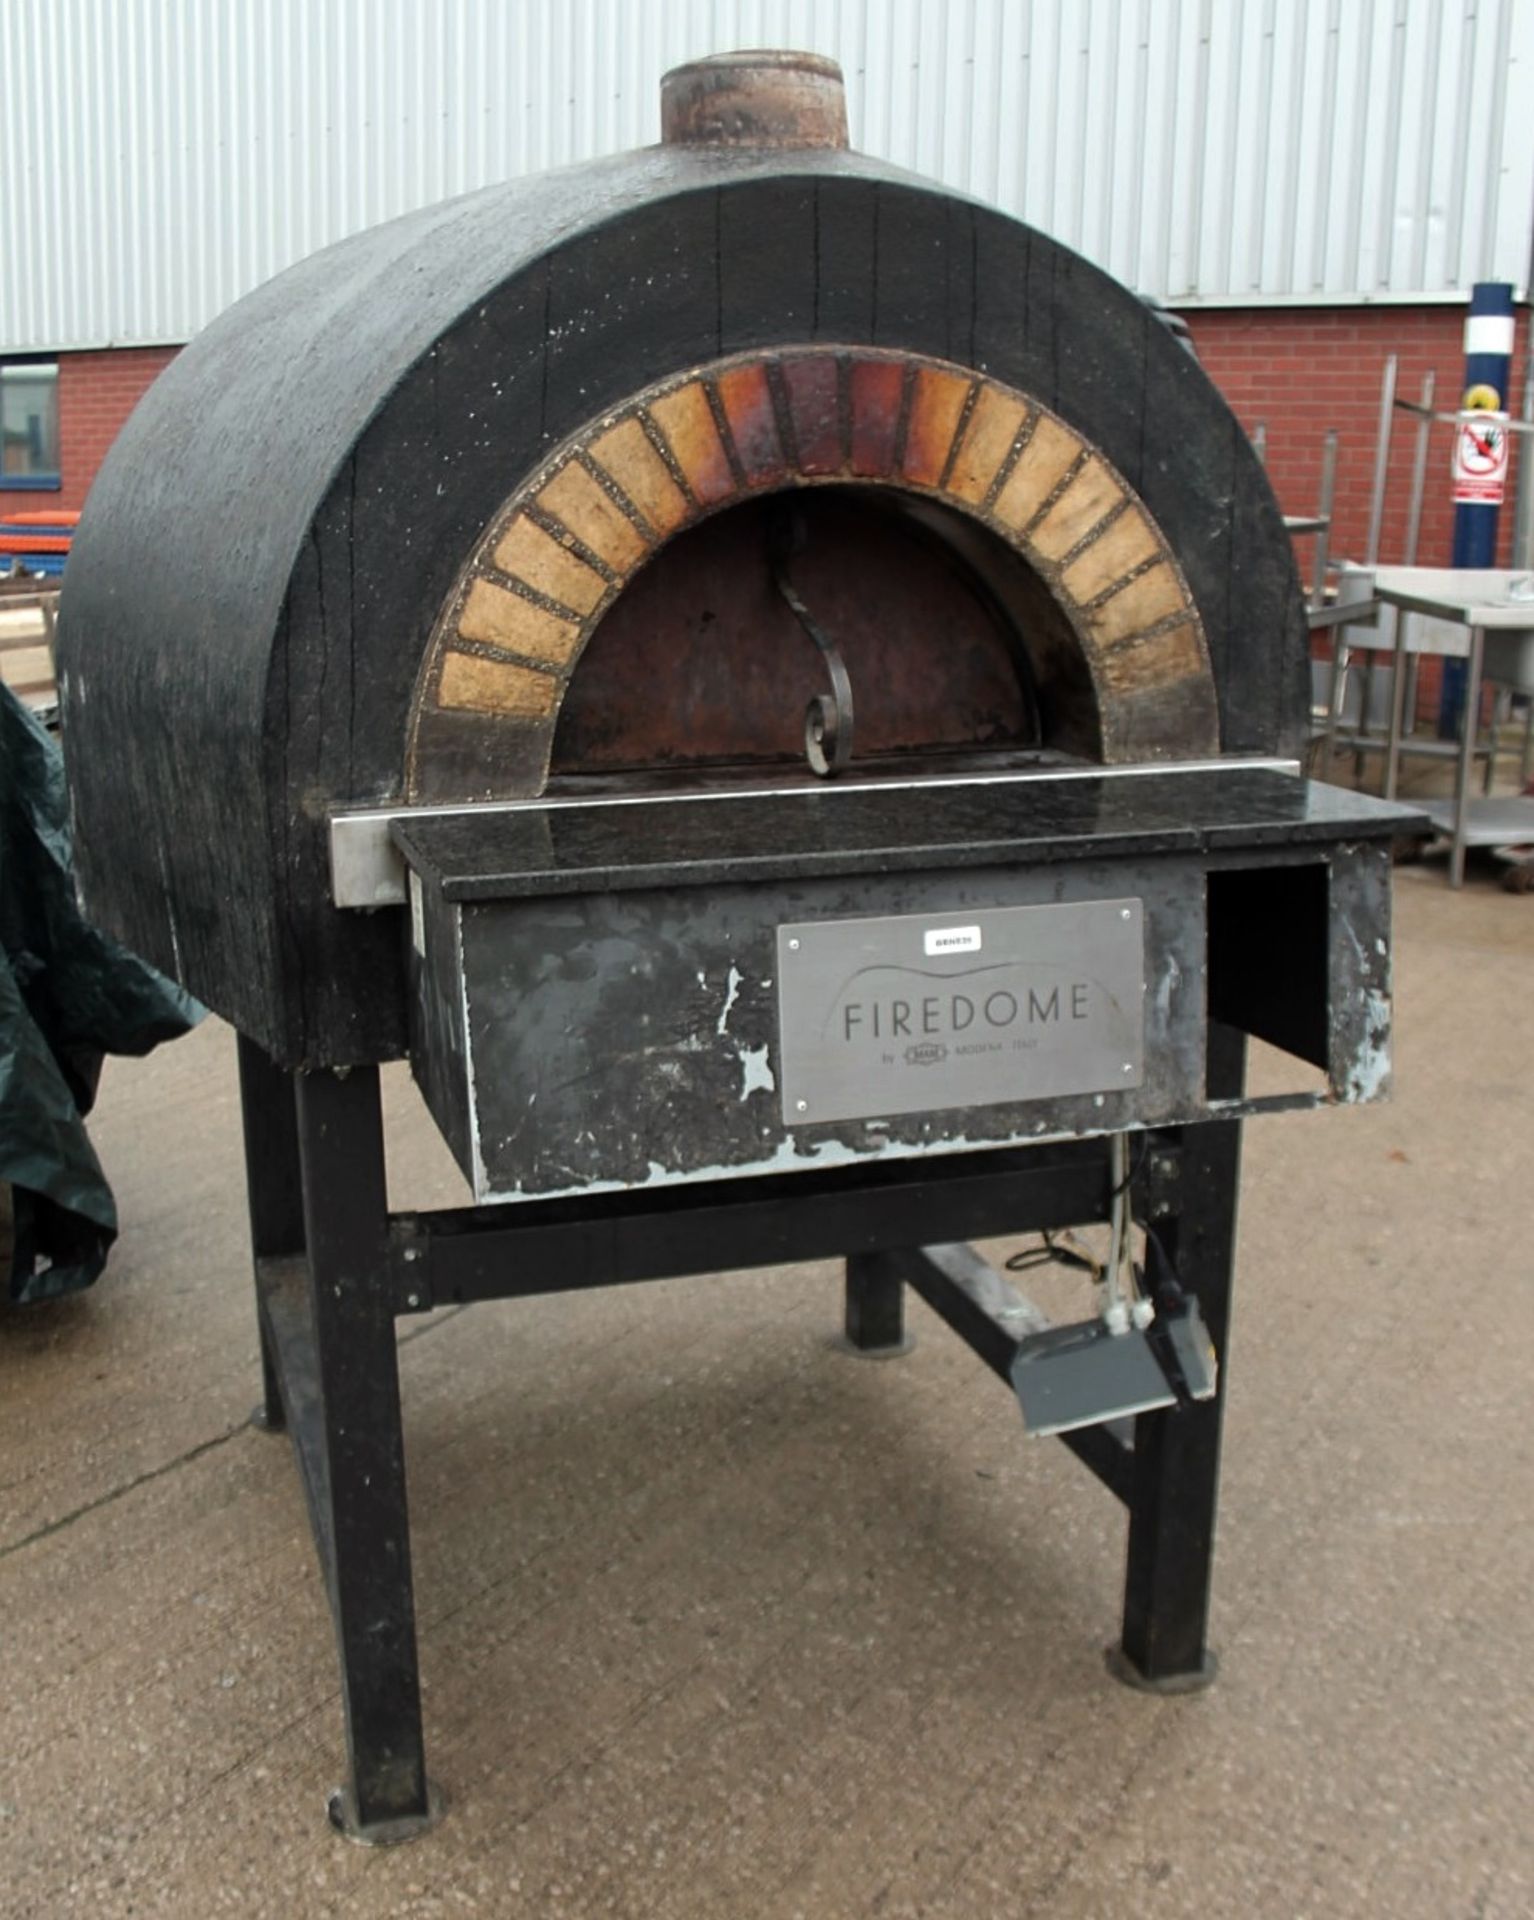 1 x MAM Firedome Commercial Stone Baked Gas Pizza Oven - Made in Italy - Type Modular Fire E - - Image 8 of 8